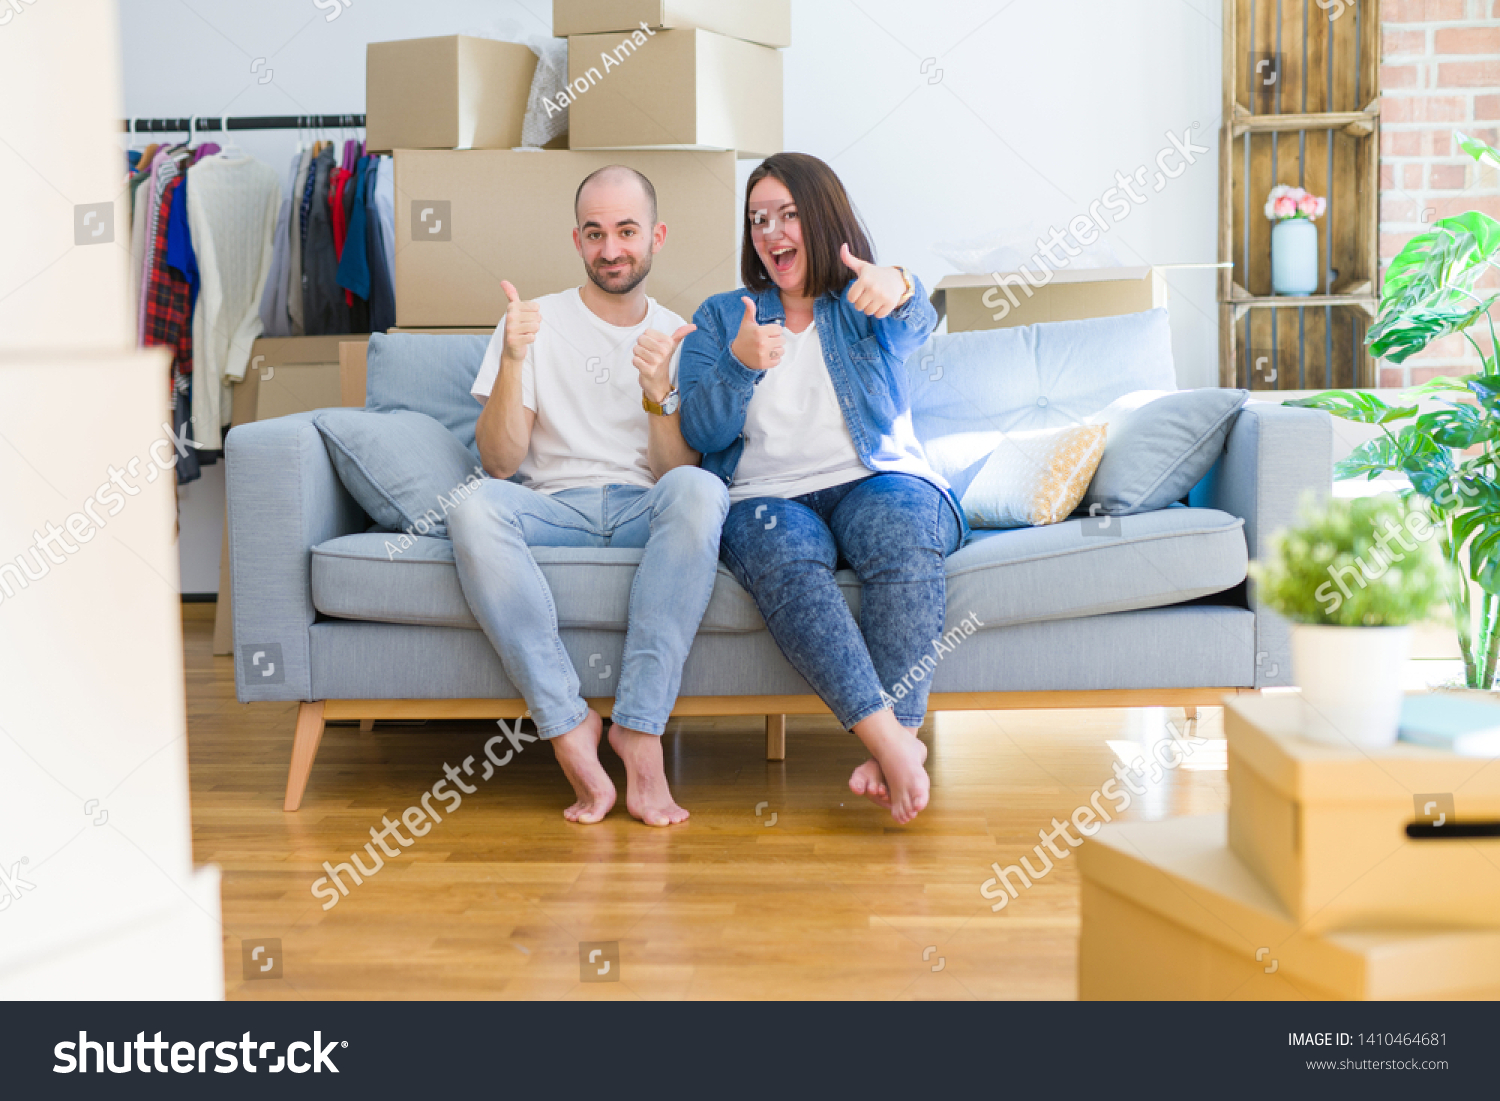 Young couple sitting on the sofa arround cardboard boxes moving to a new house success sign doing positive gesture with hand, thumbs up smiling and happy. Cheerful expression and winner gesture. #1410464681